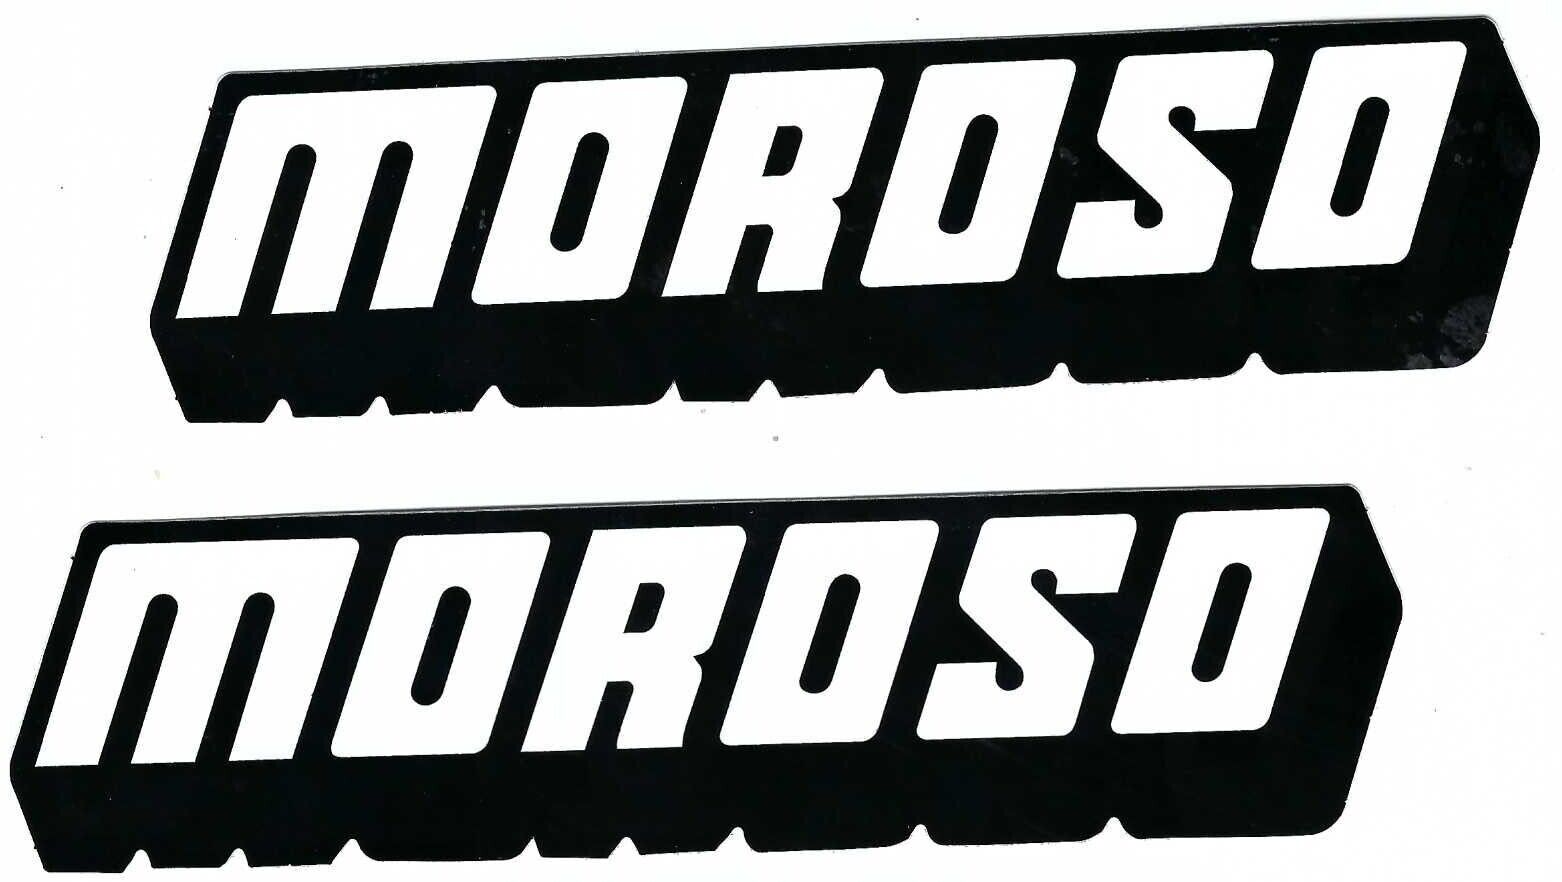 Moroso Racing Decal Stickers Set of 2  Black White Vinyl 7 Inches Long Size